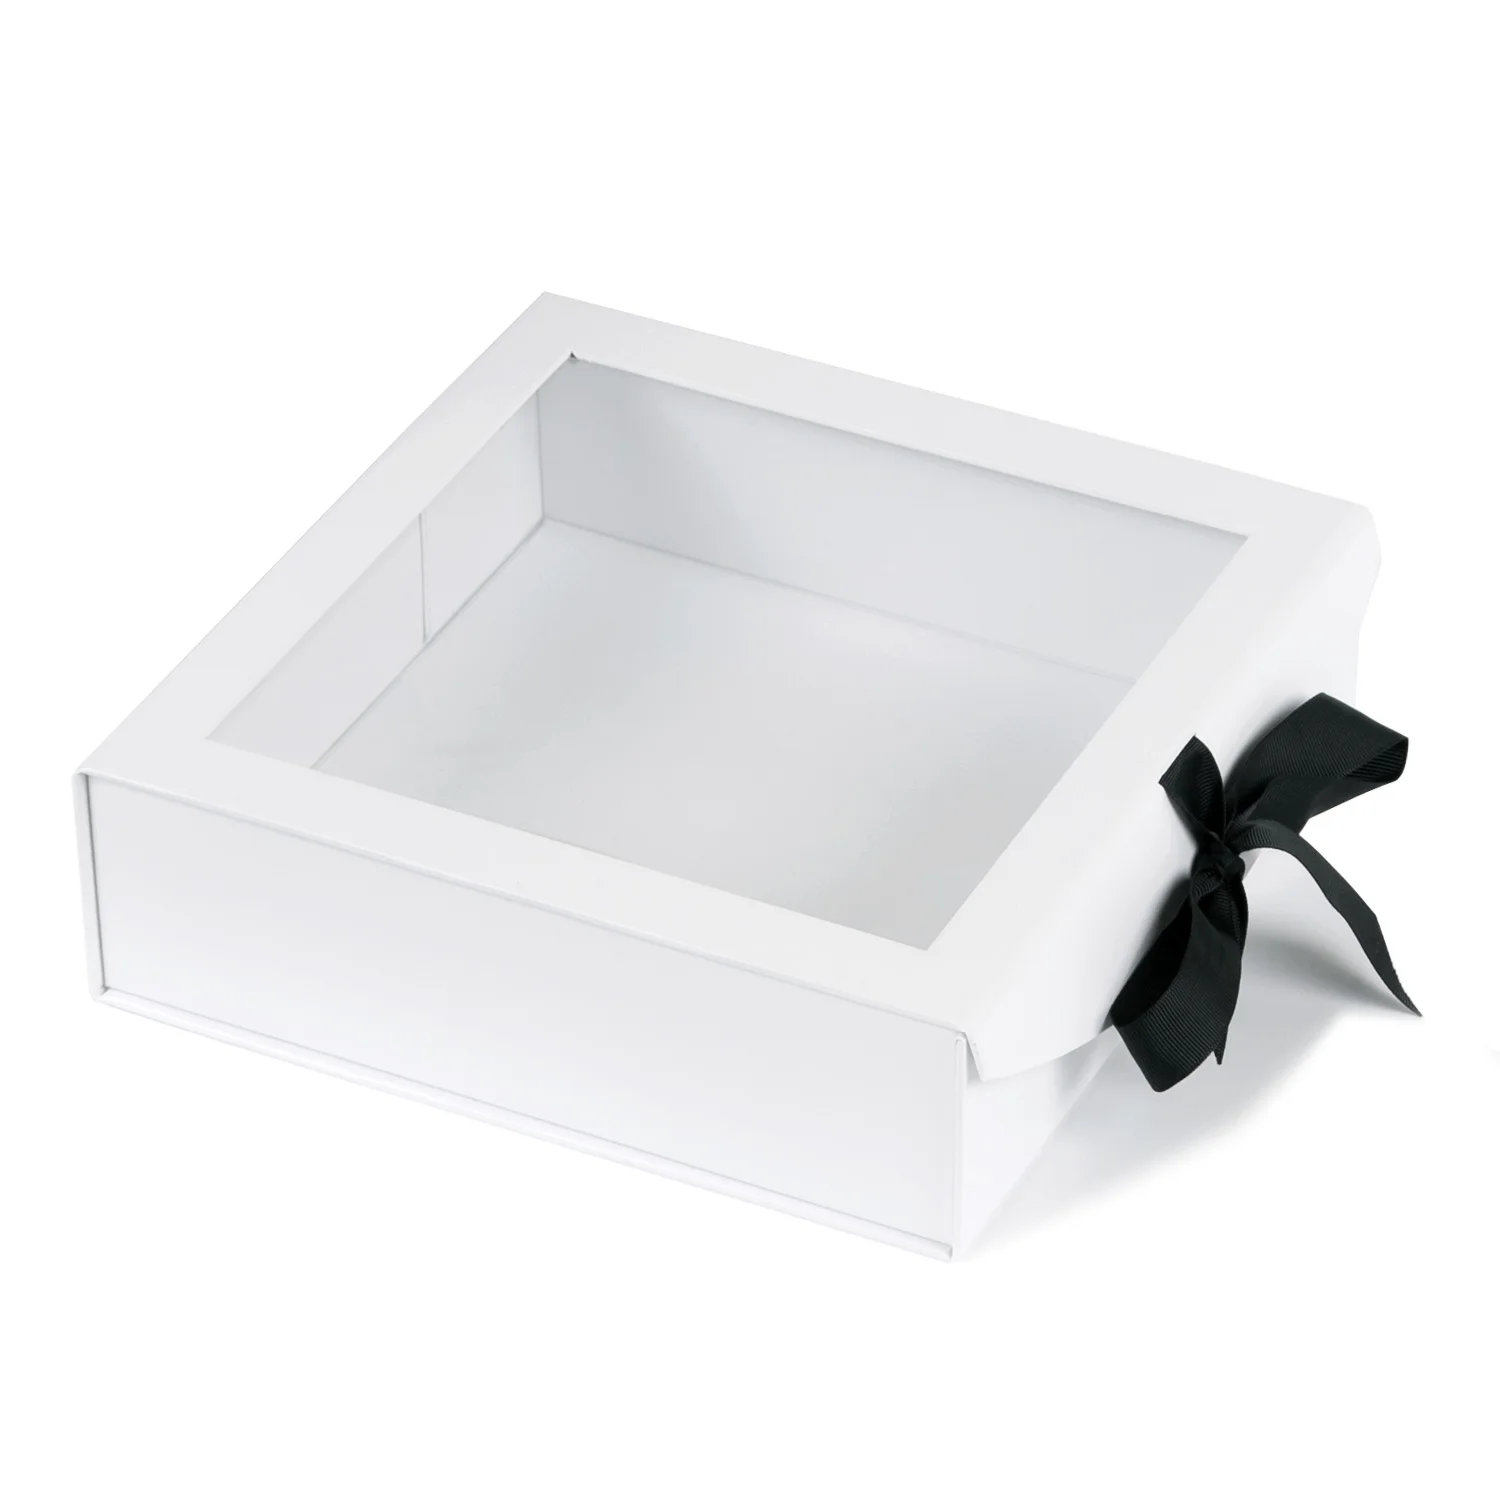 Birthday JiaWei Gift Box 13x12.1x4.5 Inches White Wedding Decorative Box for Presents Collapsible Bridesmaid Proposal Box Magnetic Hard Cardboard Gift Box Luxury Gift Boxes with Lid and Ribbon 